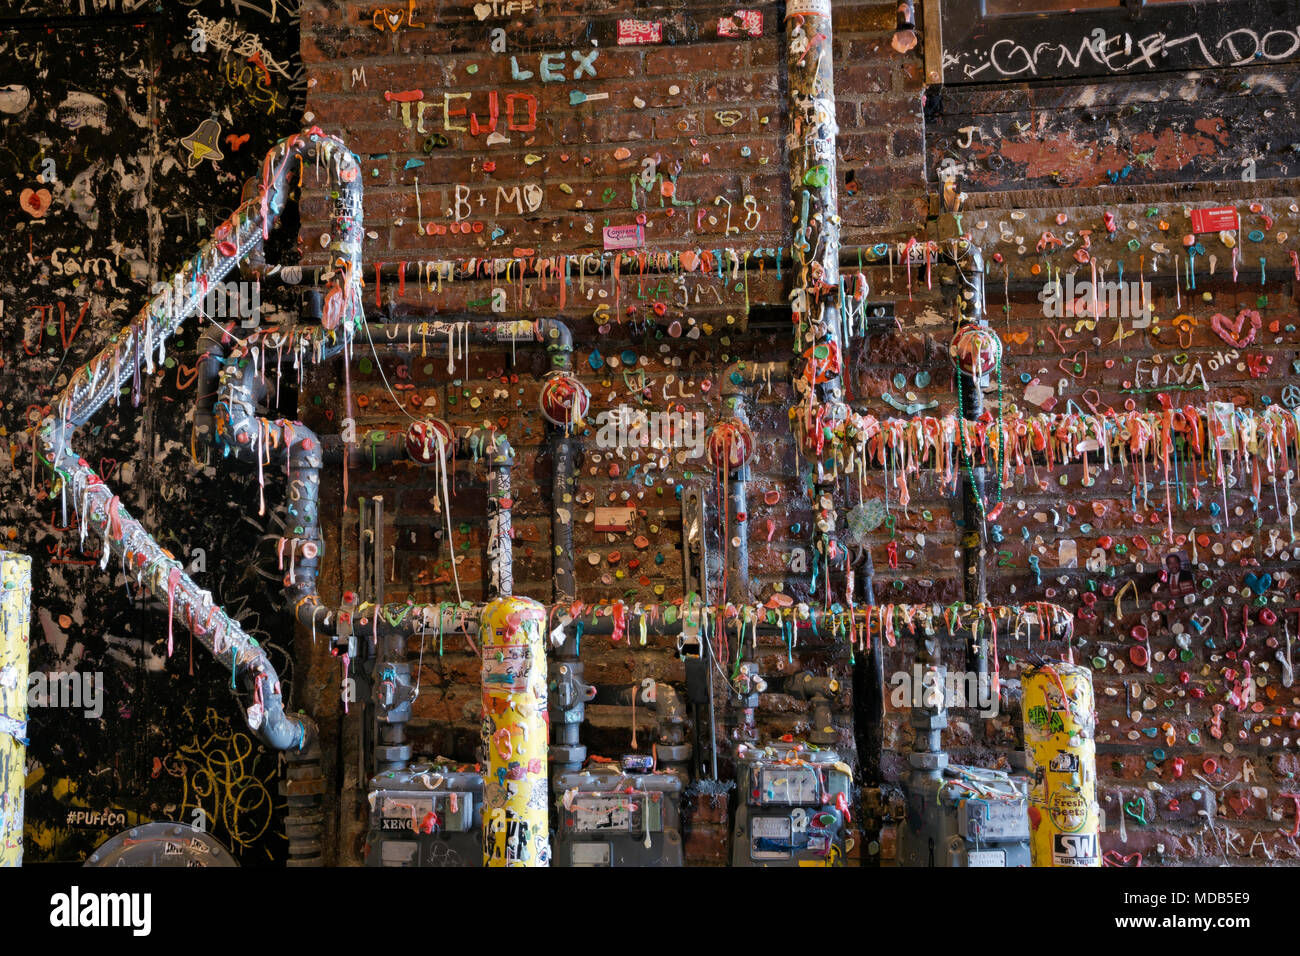 WA15280-00...WASHINGTON - Seattle's gum wall a couple weeks after a semi-annual cleaning, located in Post Alley, south of the Pike Place Market. Stock Photo